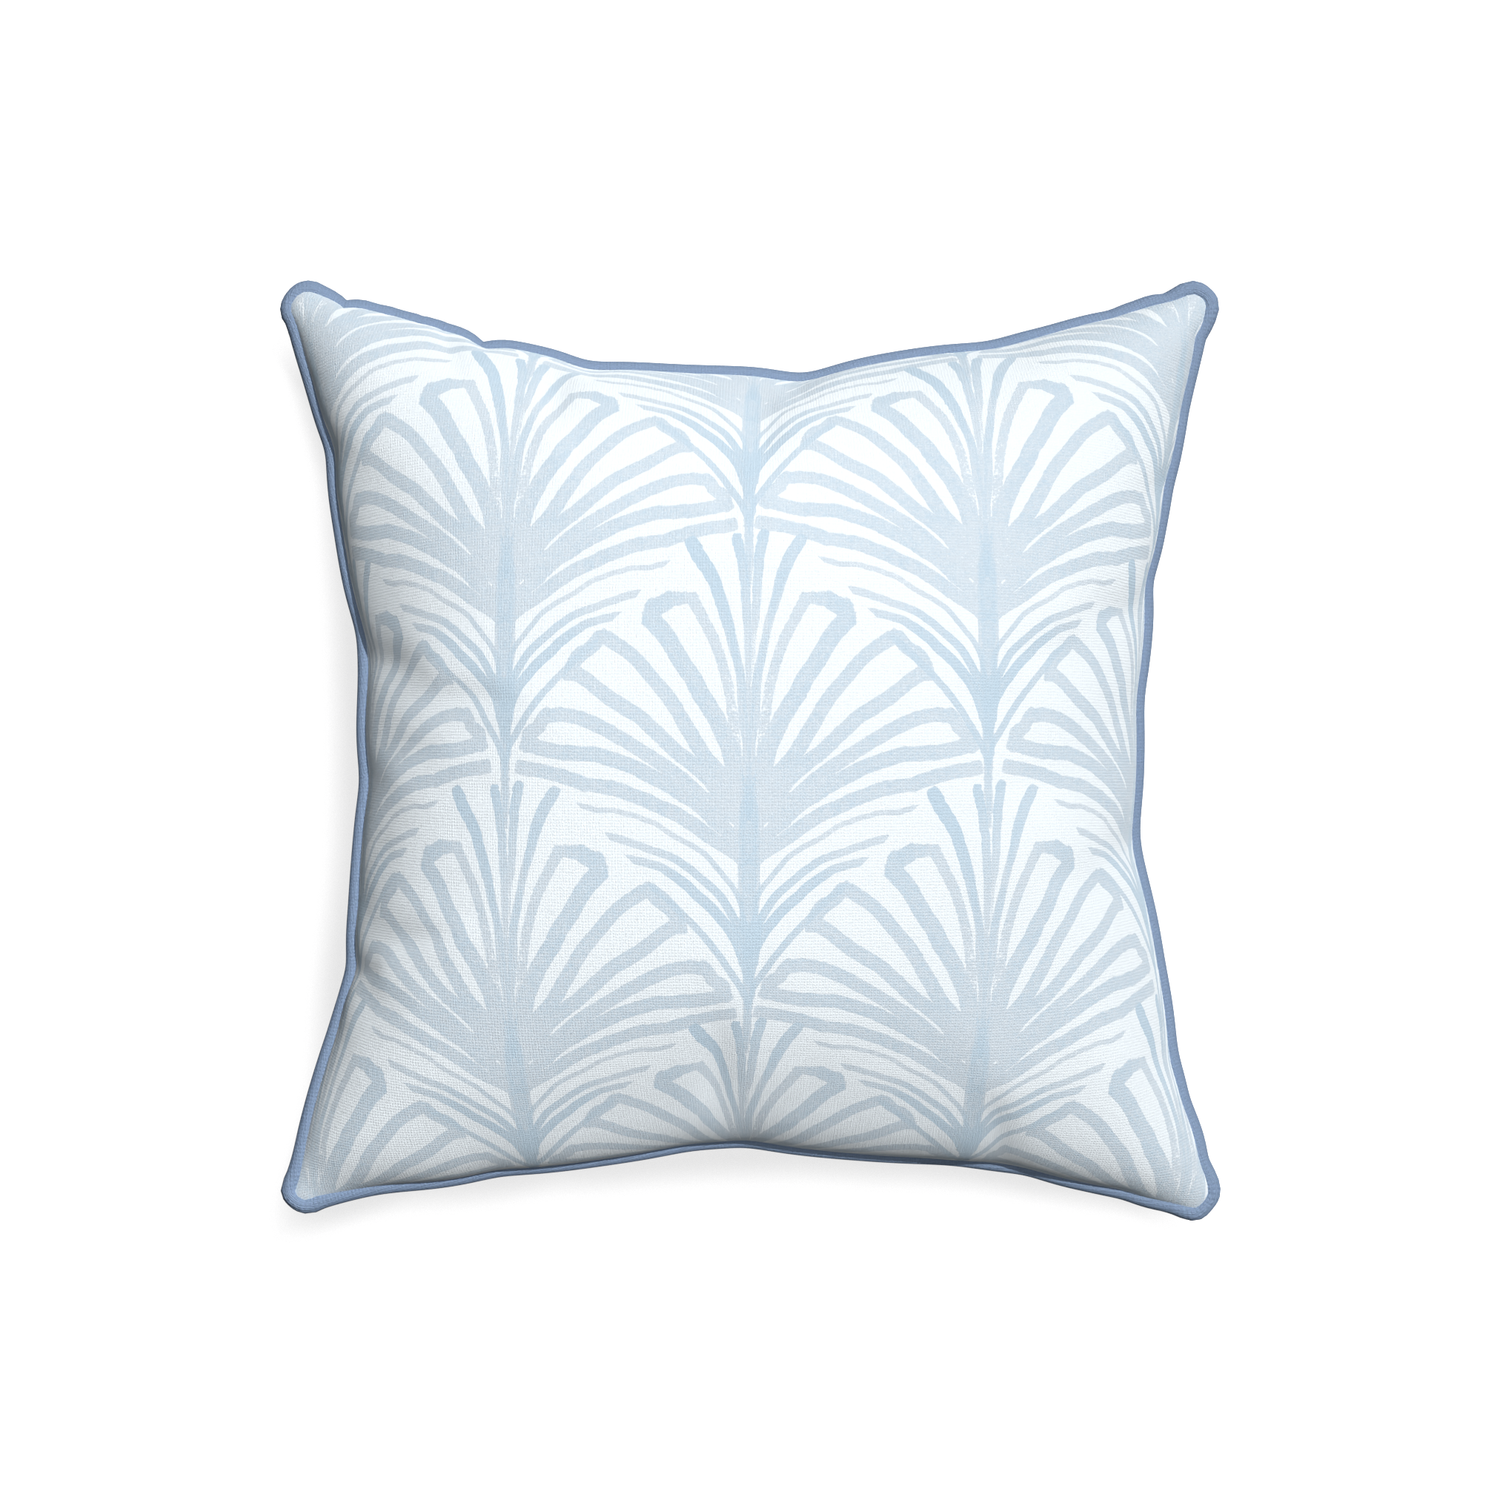 20-square suzy sky custom pillow with sky piping on white background